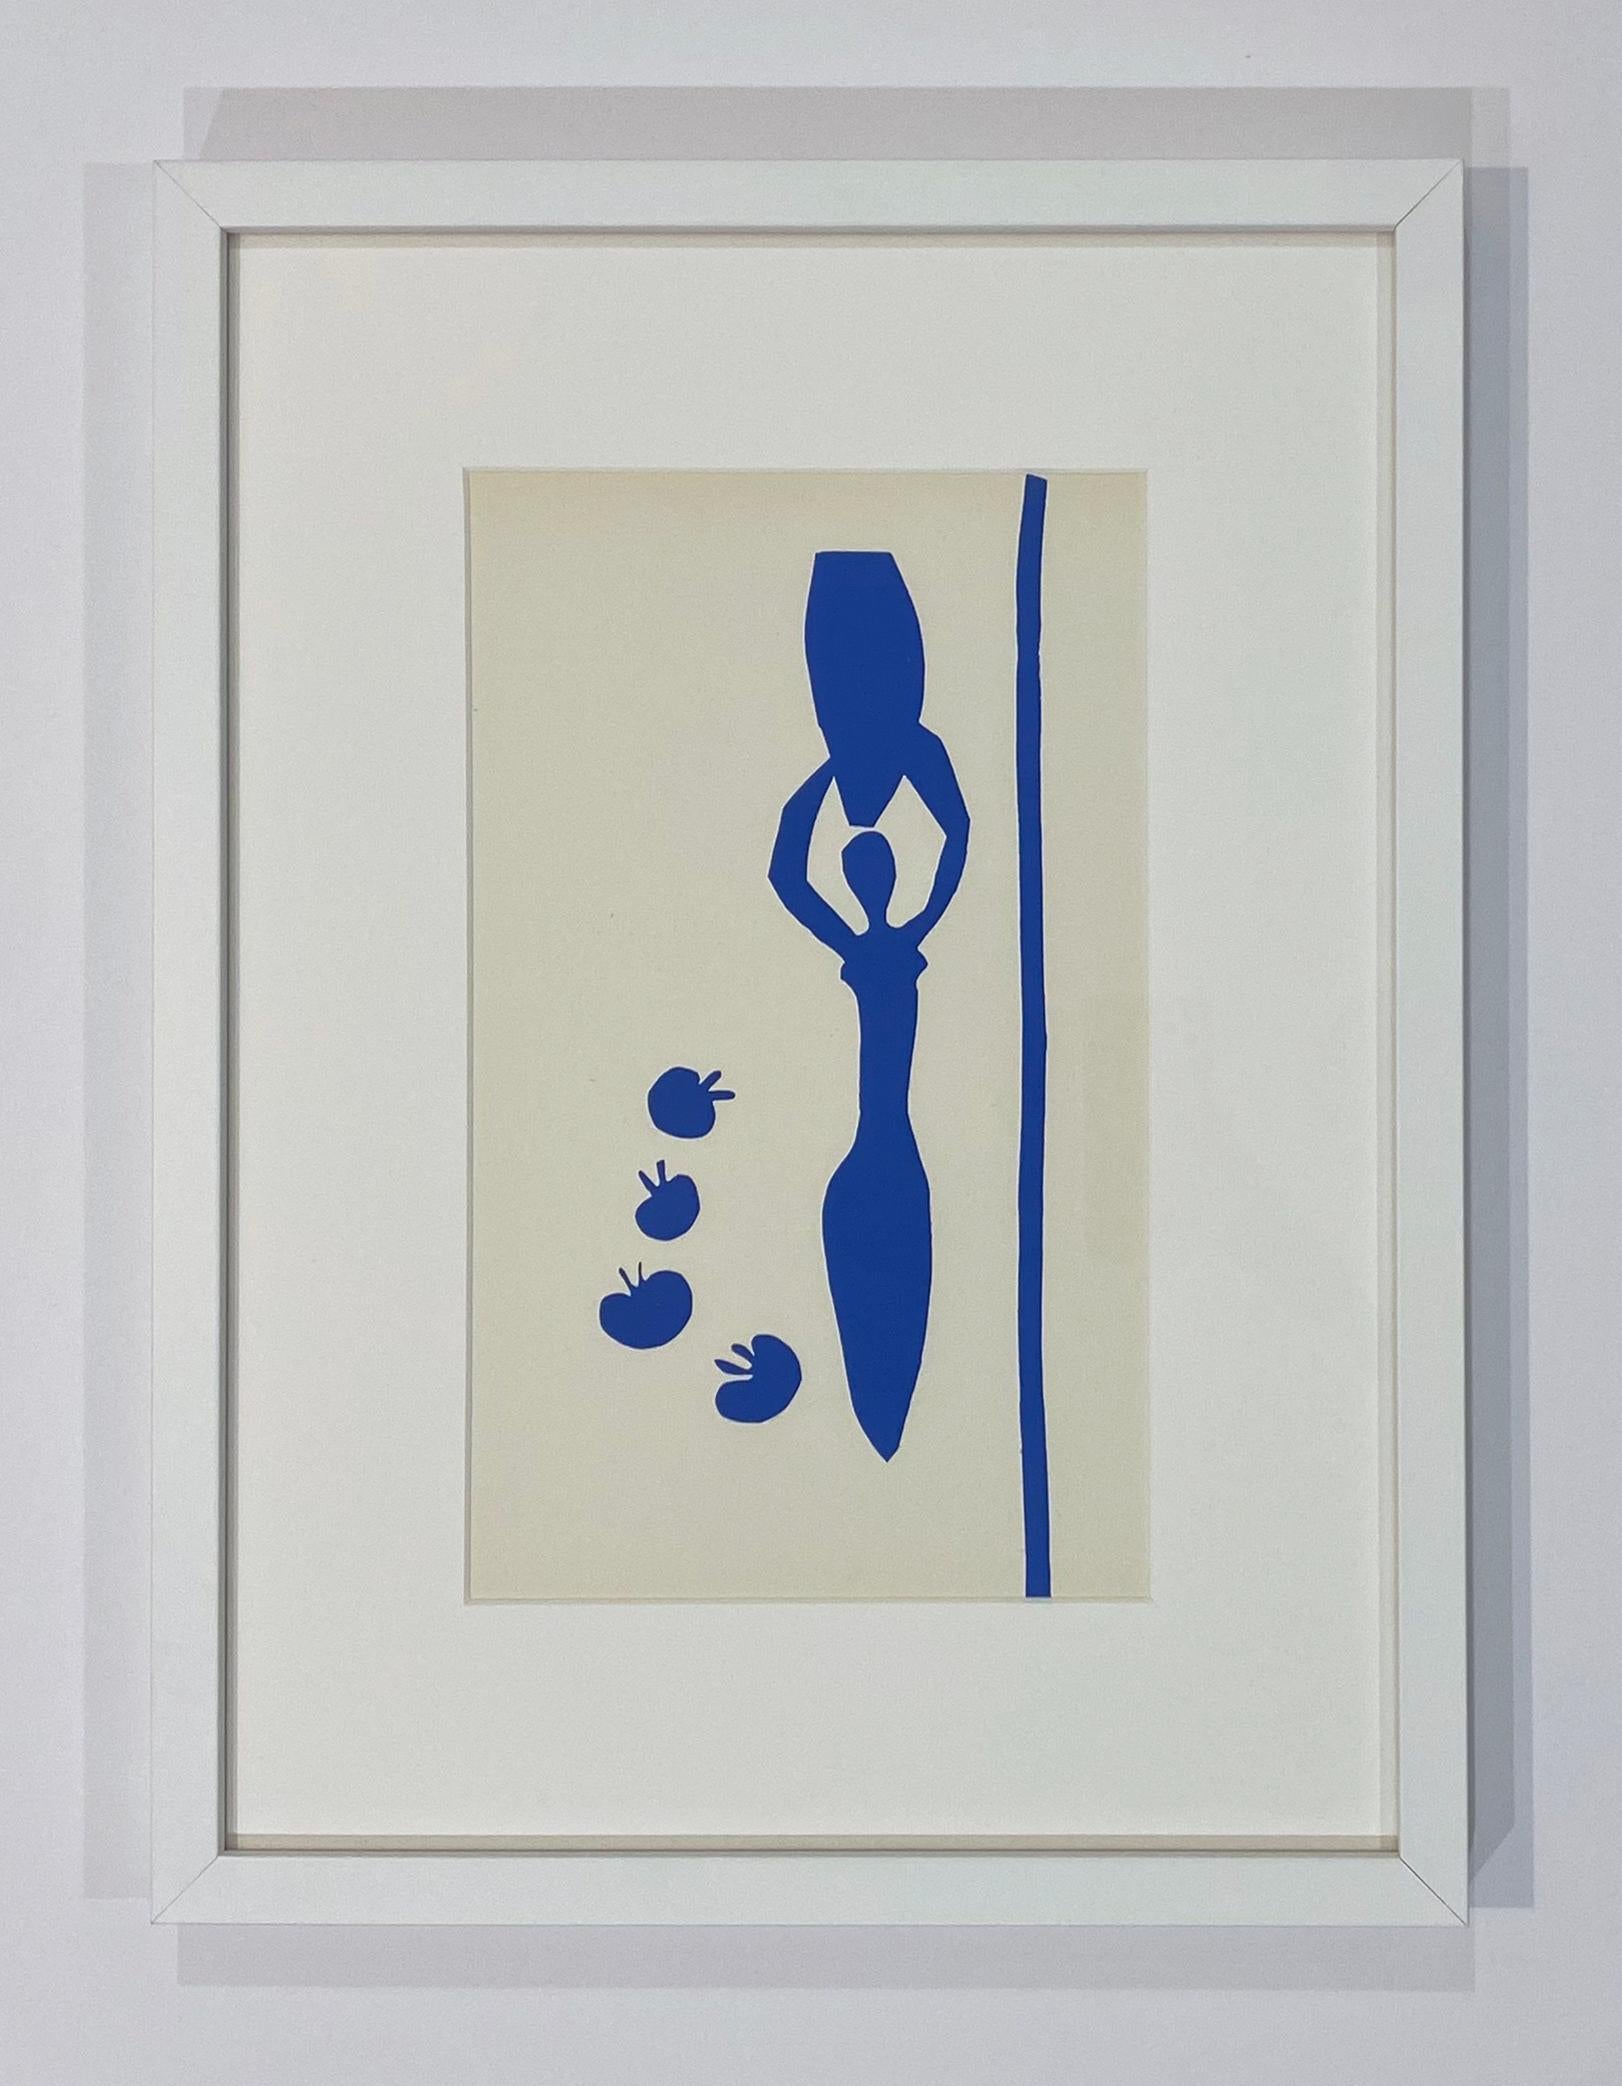 Le Jarre II, from The Last Works of Henri Matisse - Print by (after) Henri Matisse